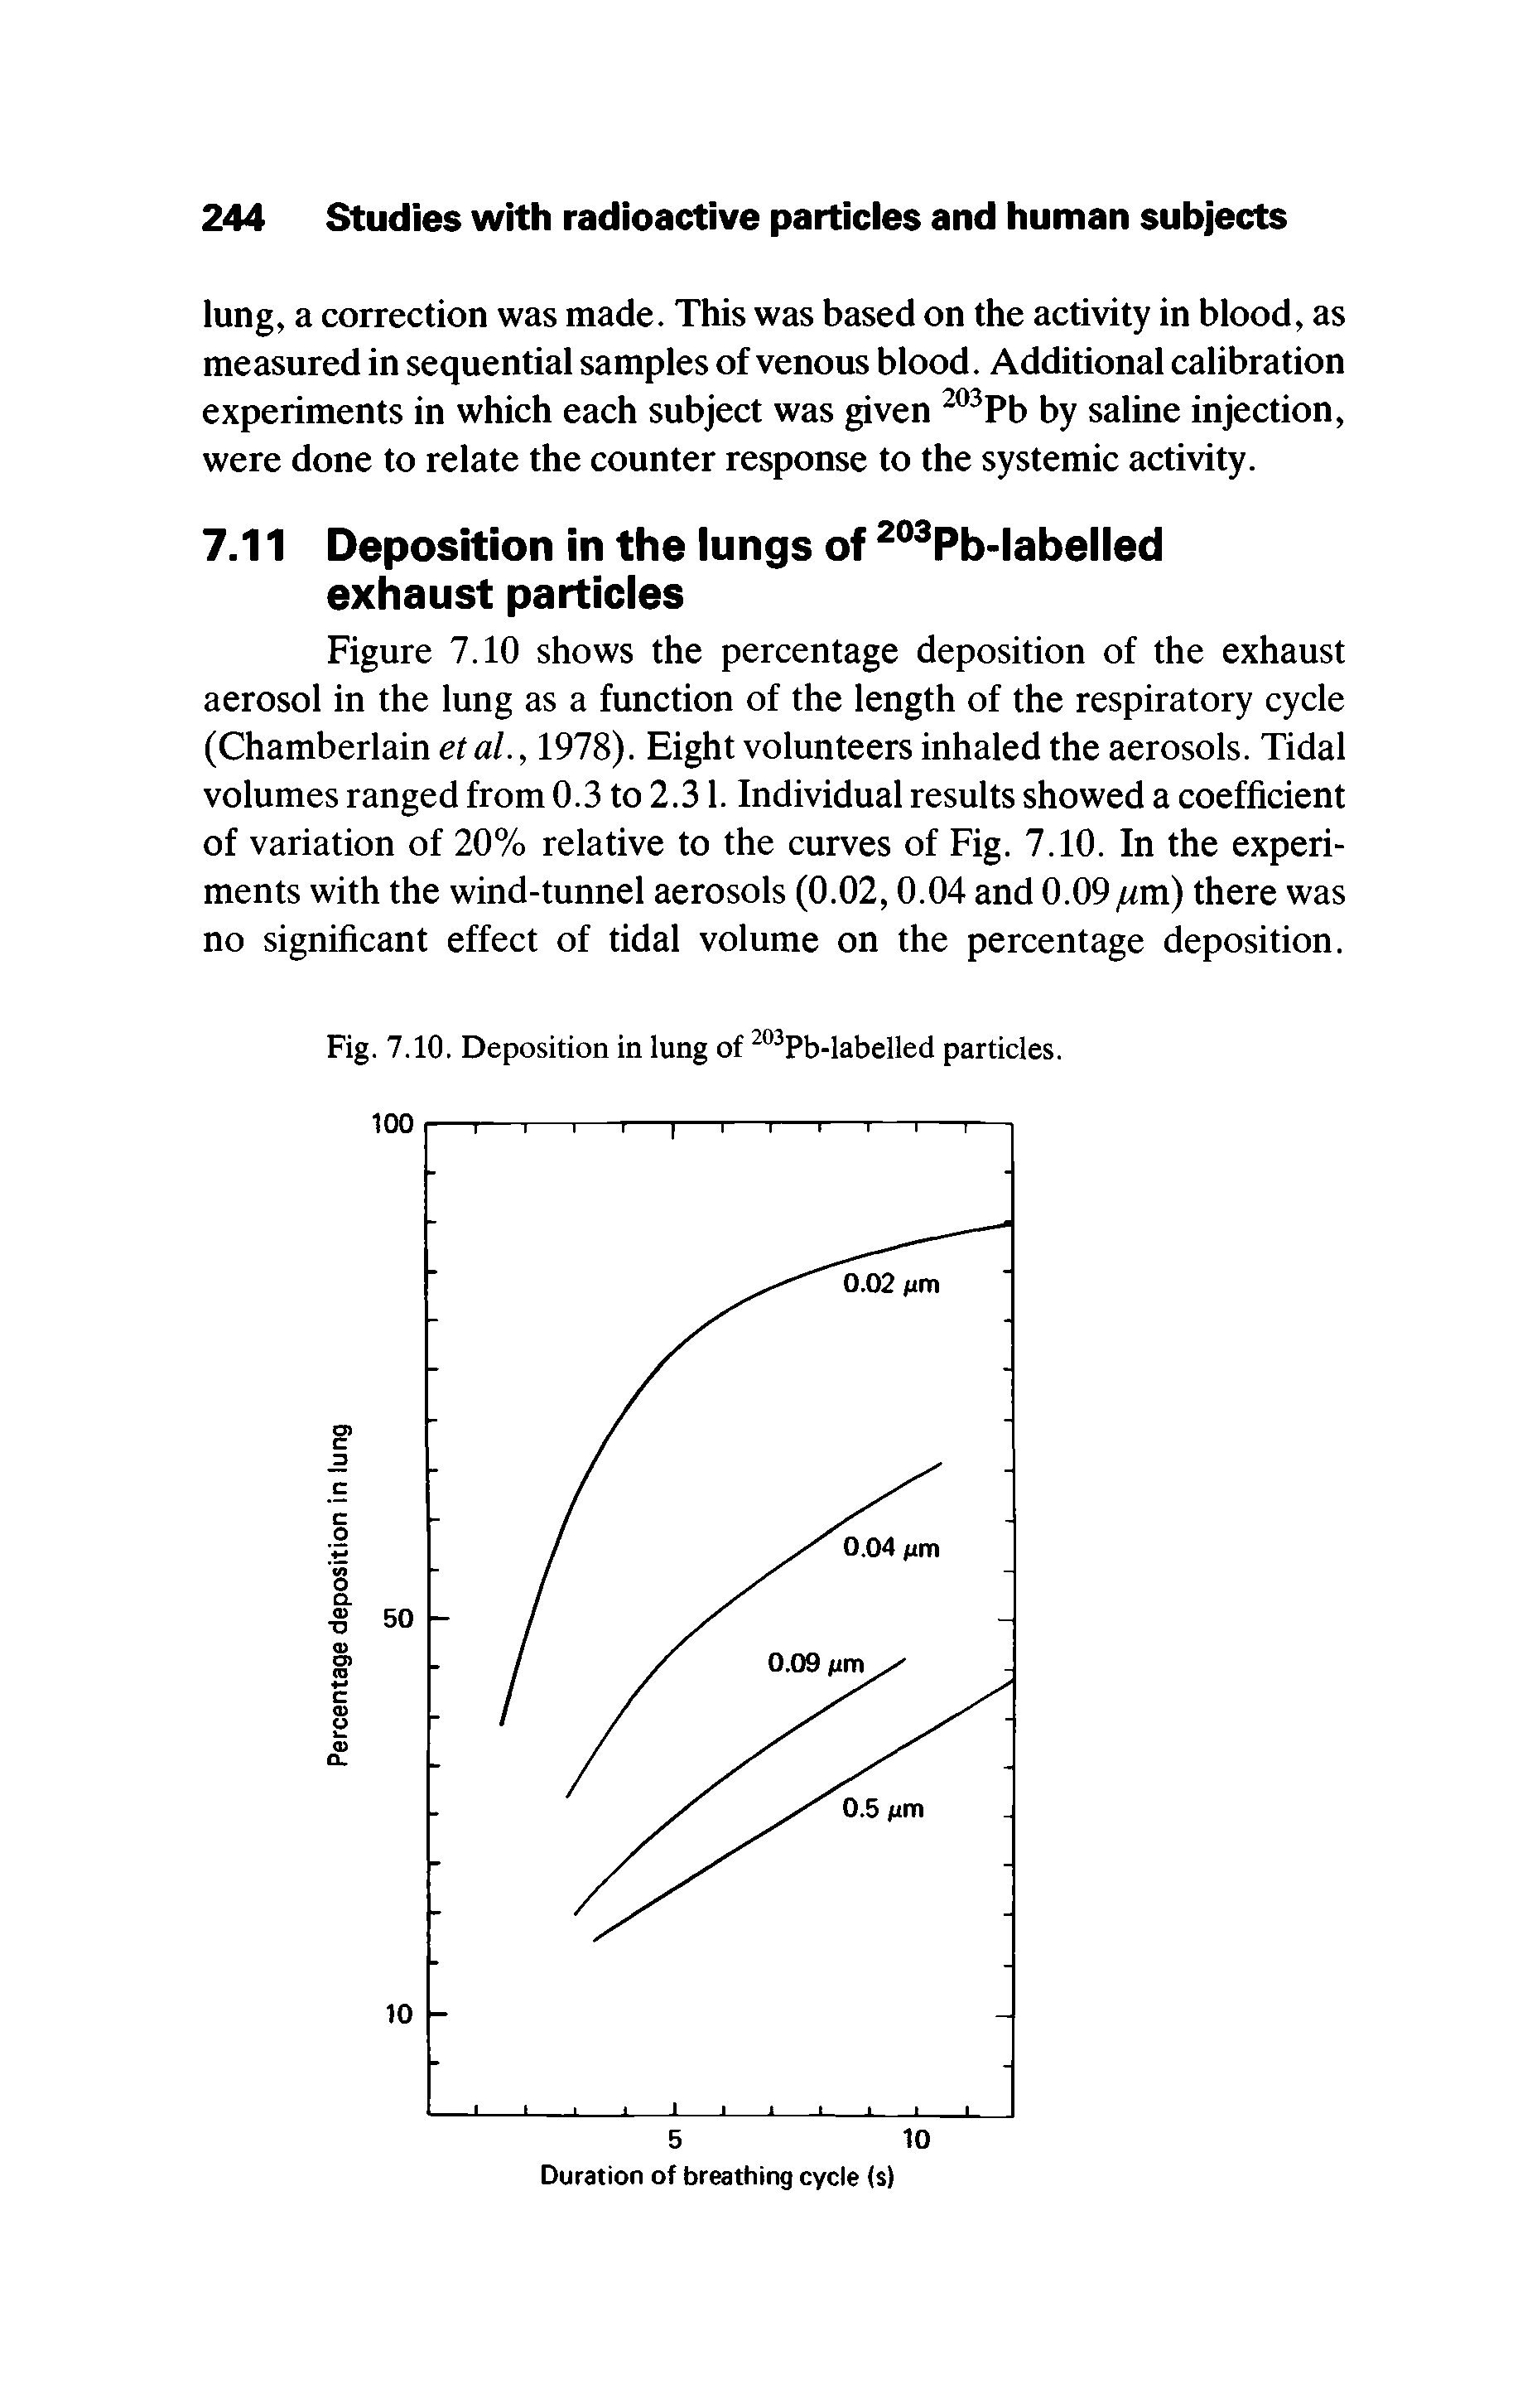 Figure 7.10 shows the percentage deposition of the exhaust aerosol in the lung as a function of the length of the respiratory cycle (Chamberlain etal., 1978). Eight volunteers inhaled the aerosols. Tidal volumes ranged from 0.3 to 2.31. Individual results showed a coefficient of variation of 20% relative to the curves of Fig. 7.10. In the experiments with the wind-tunnel aerosols (0.02,0.04 and 0.09 m) there was no significant effect of tidal volume on the percentage deposition.